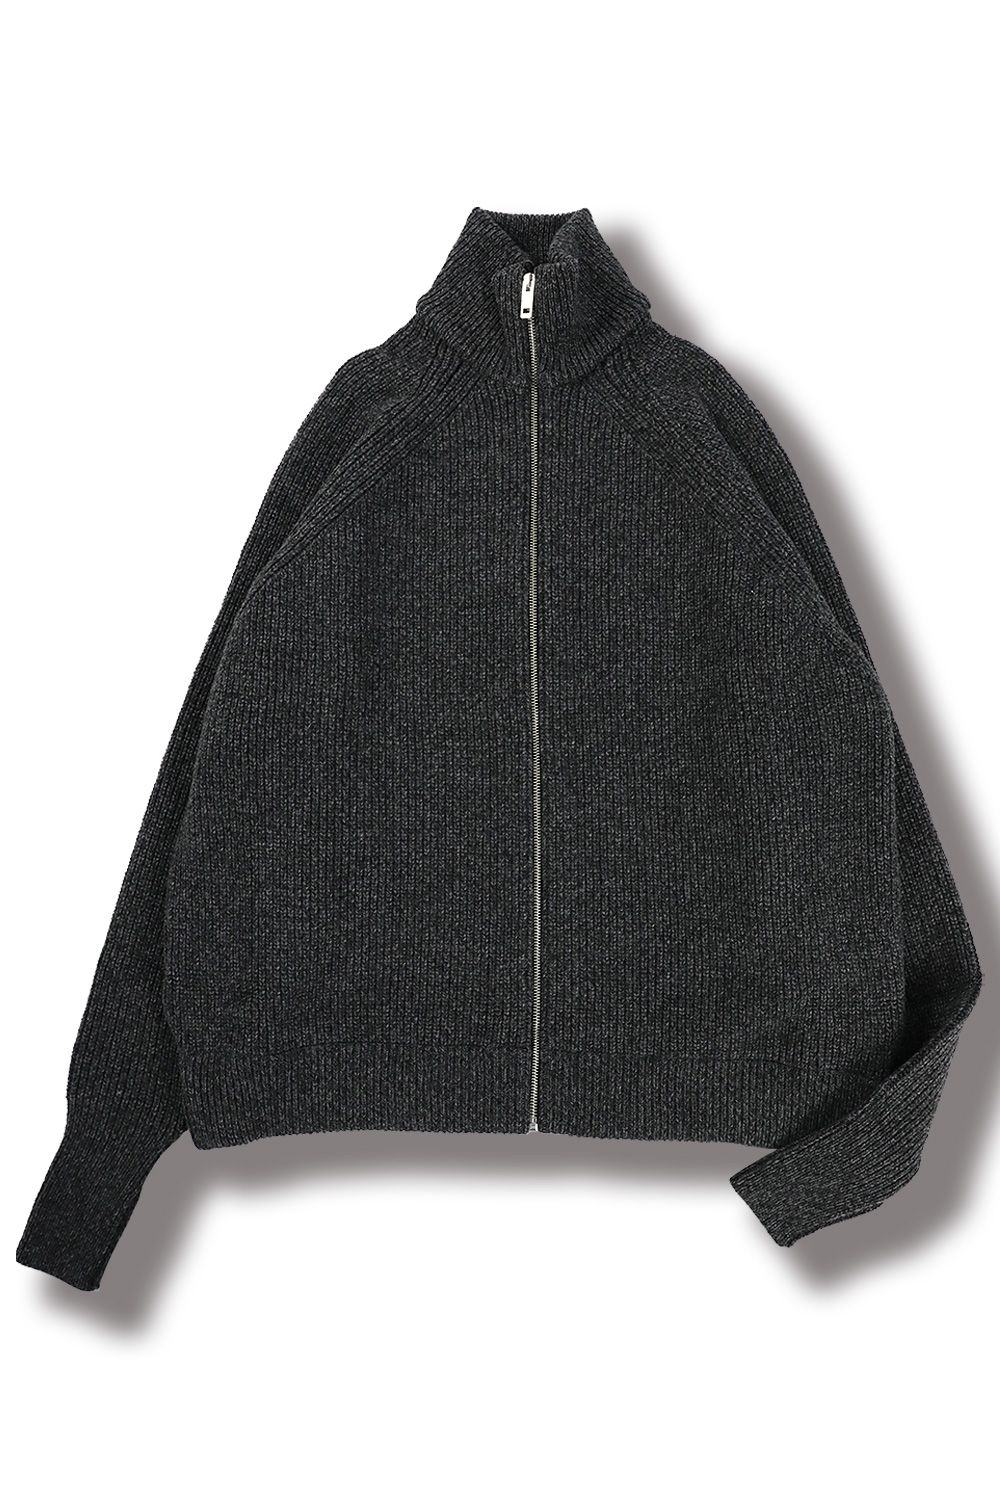 THE RERACS - 【23AW】RERACS DRIVERS KNIT(TOP GRAY/BULKY CASHMERE ...